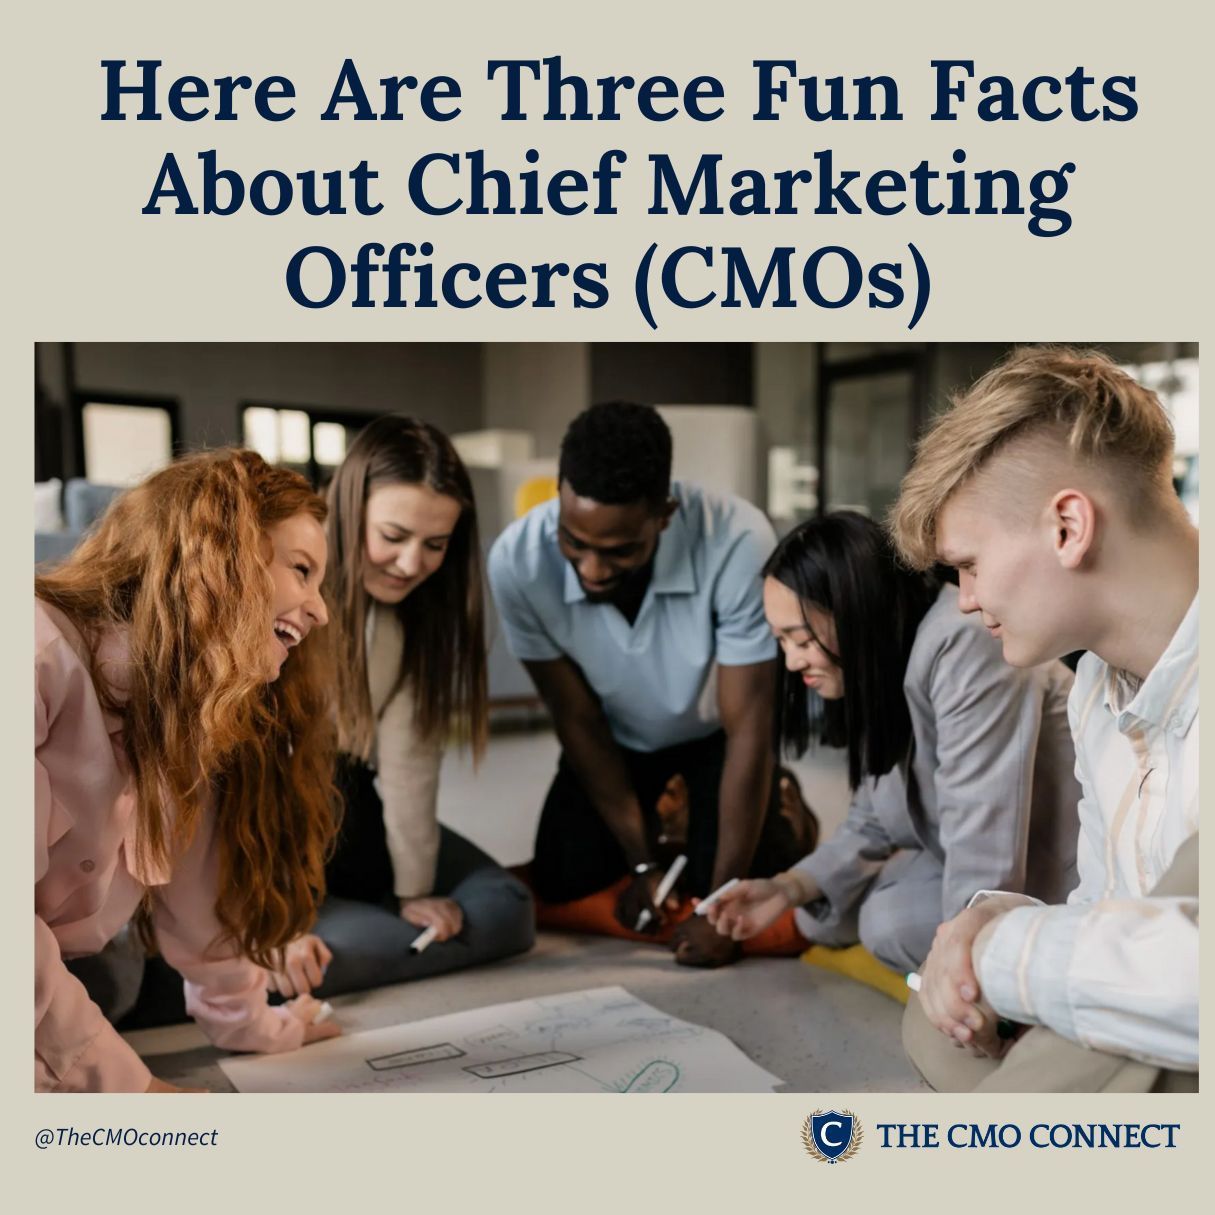 The CMO Connect Three Fun Facts About Chief Marketing Officers